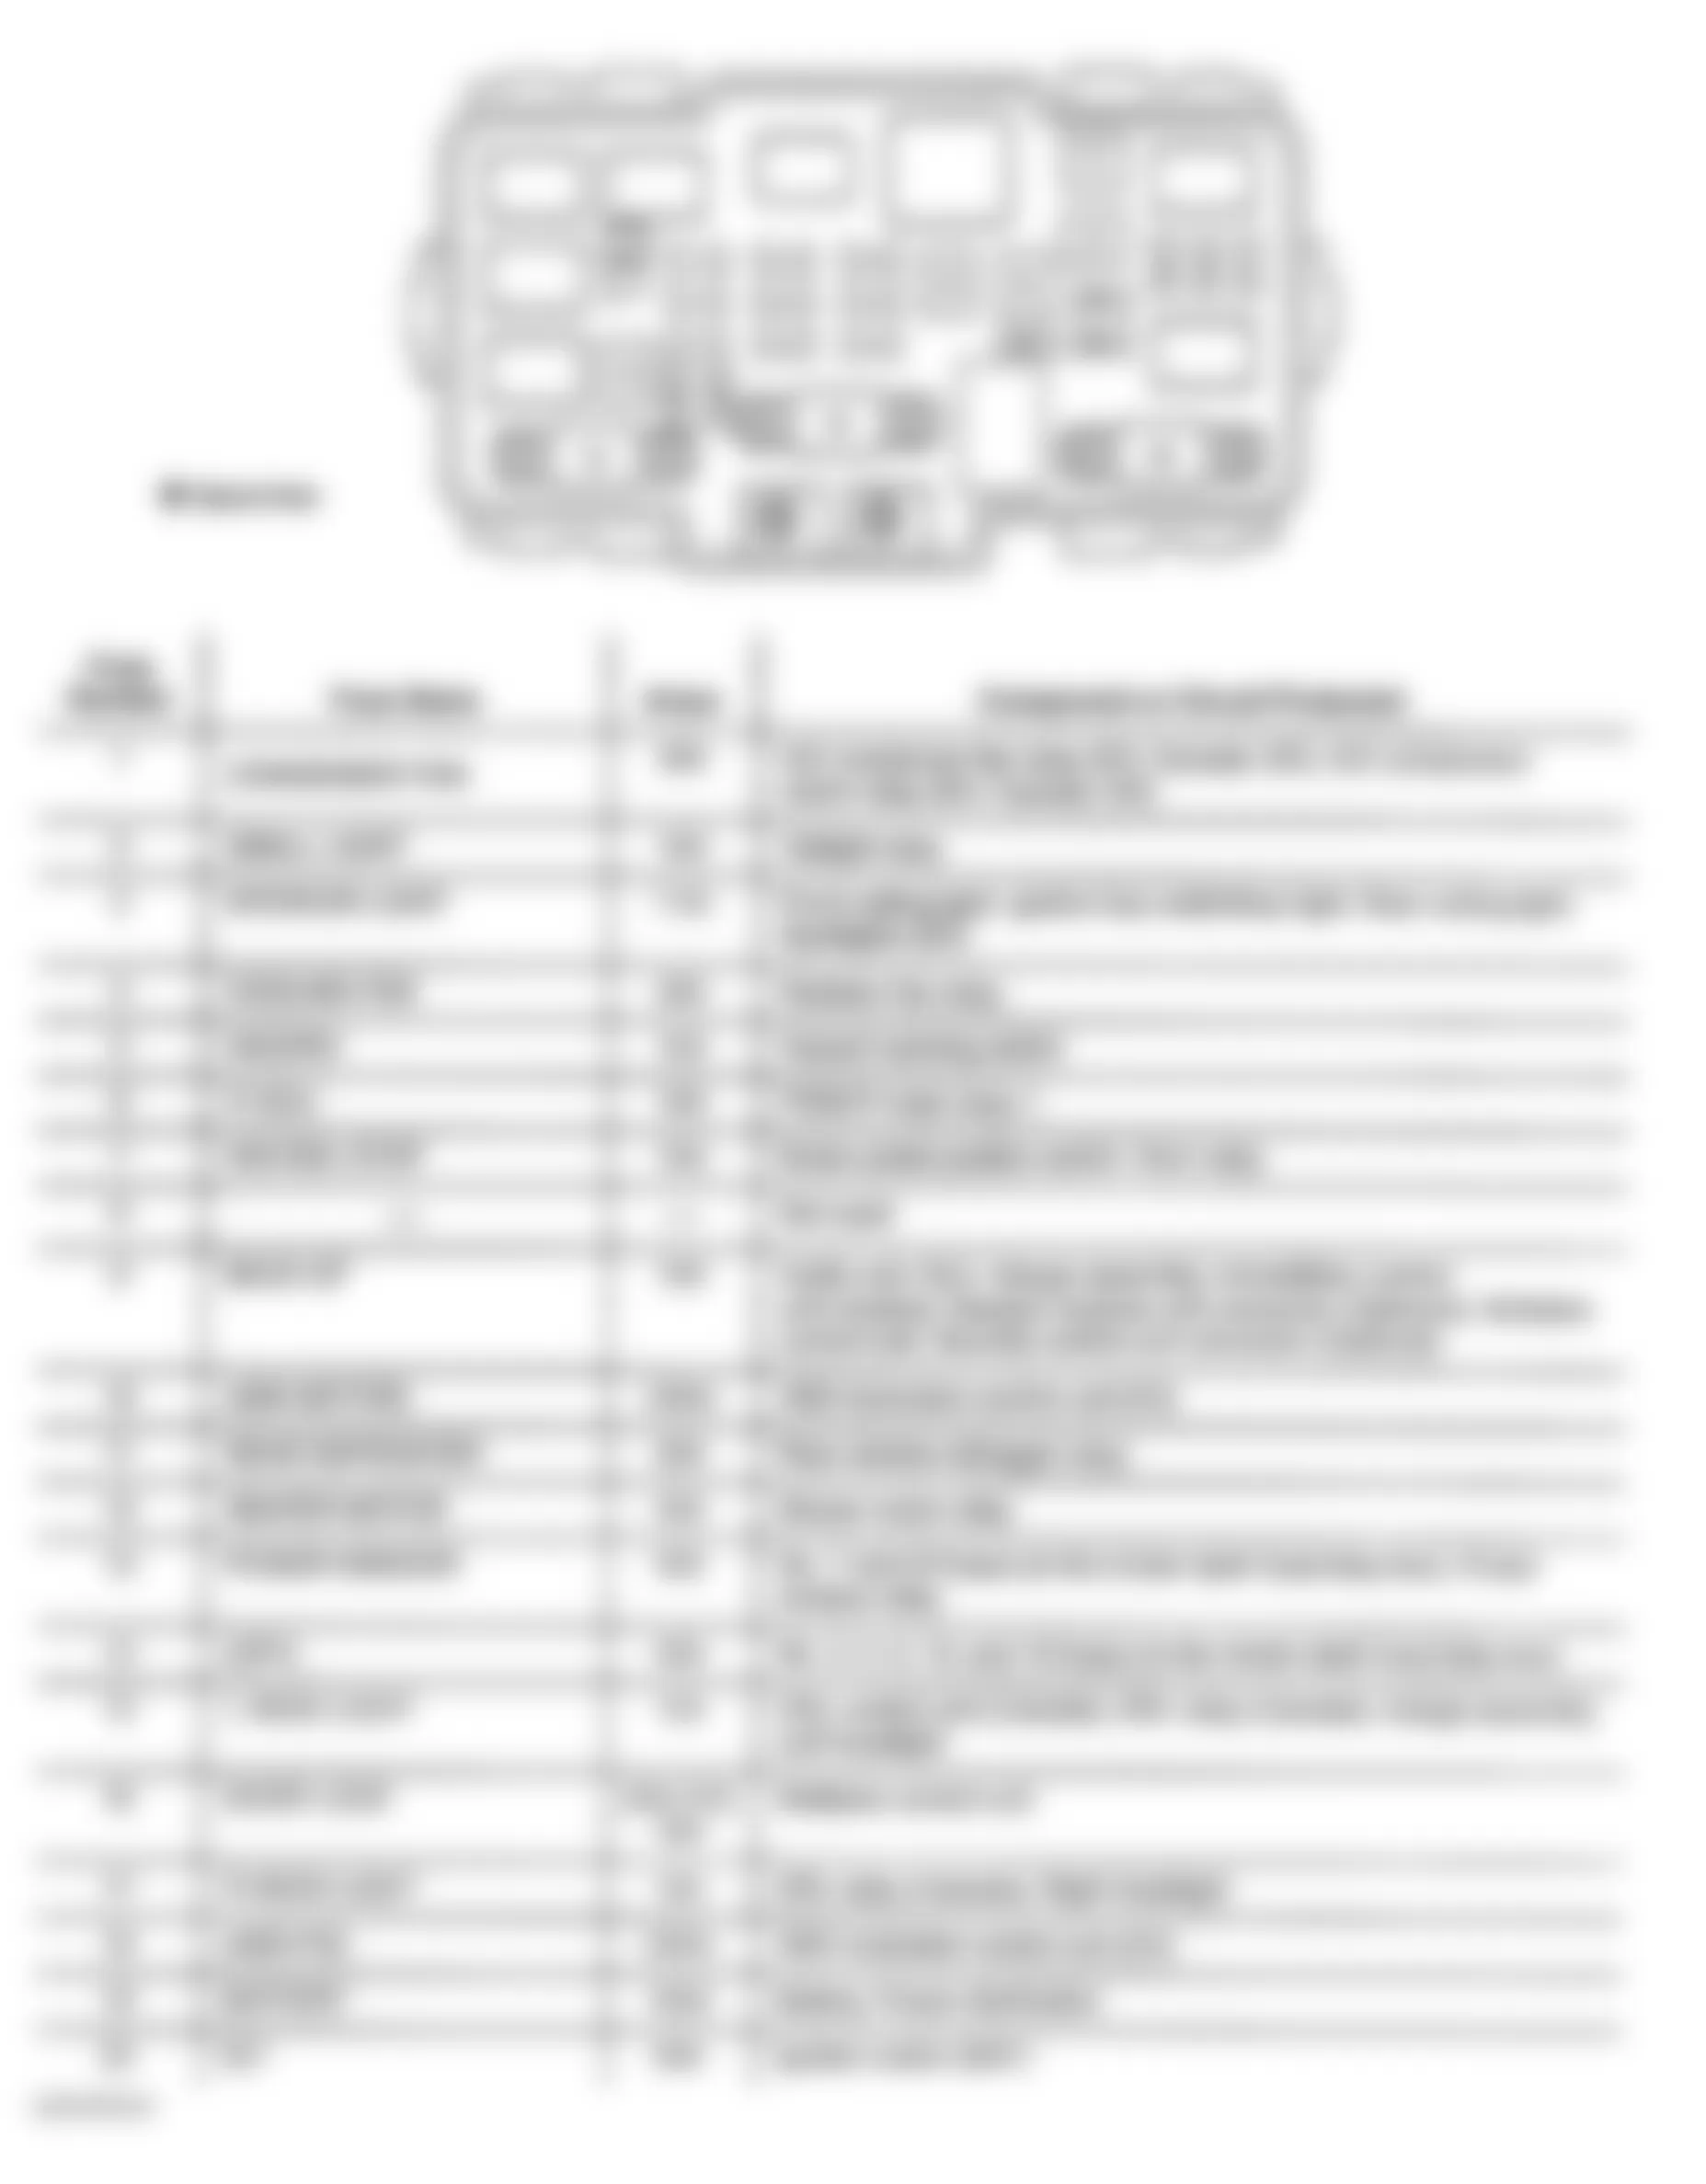 Honda Element EX 2003 - Component Locations -  Identifying Under-Hood Fuse/Relay Box Components